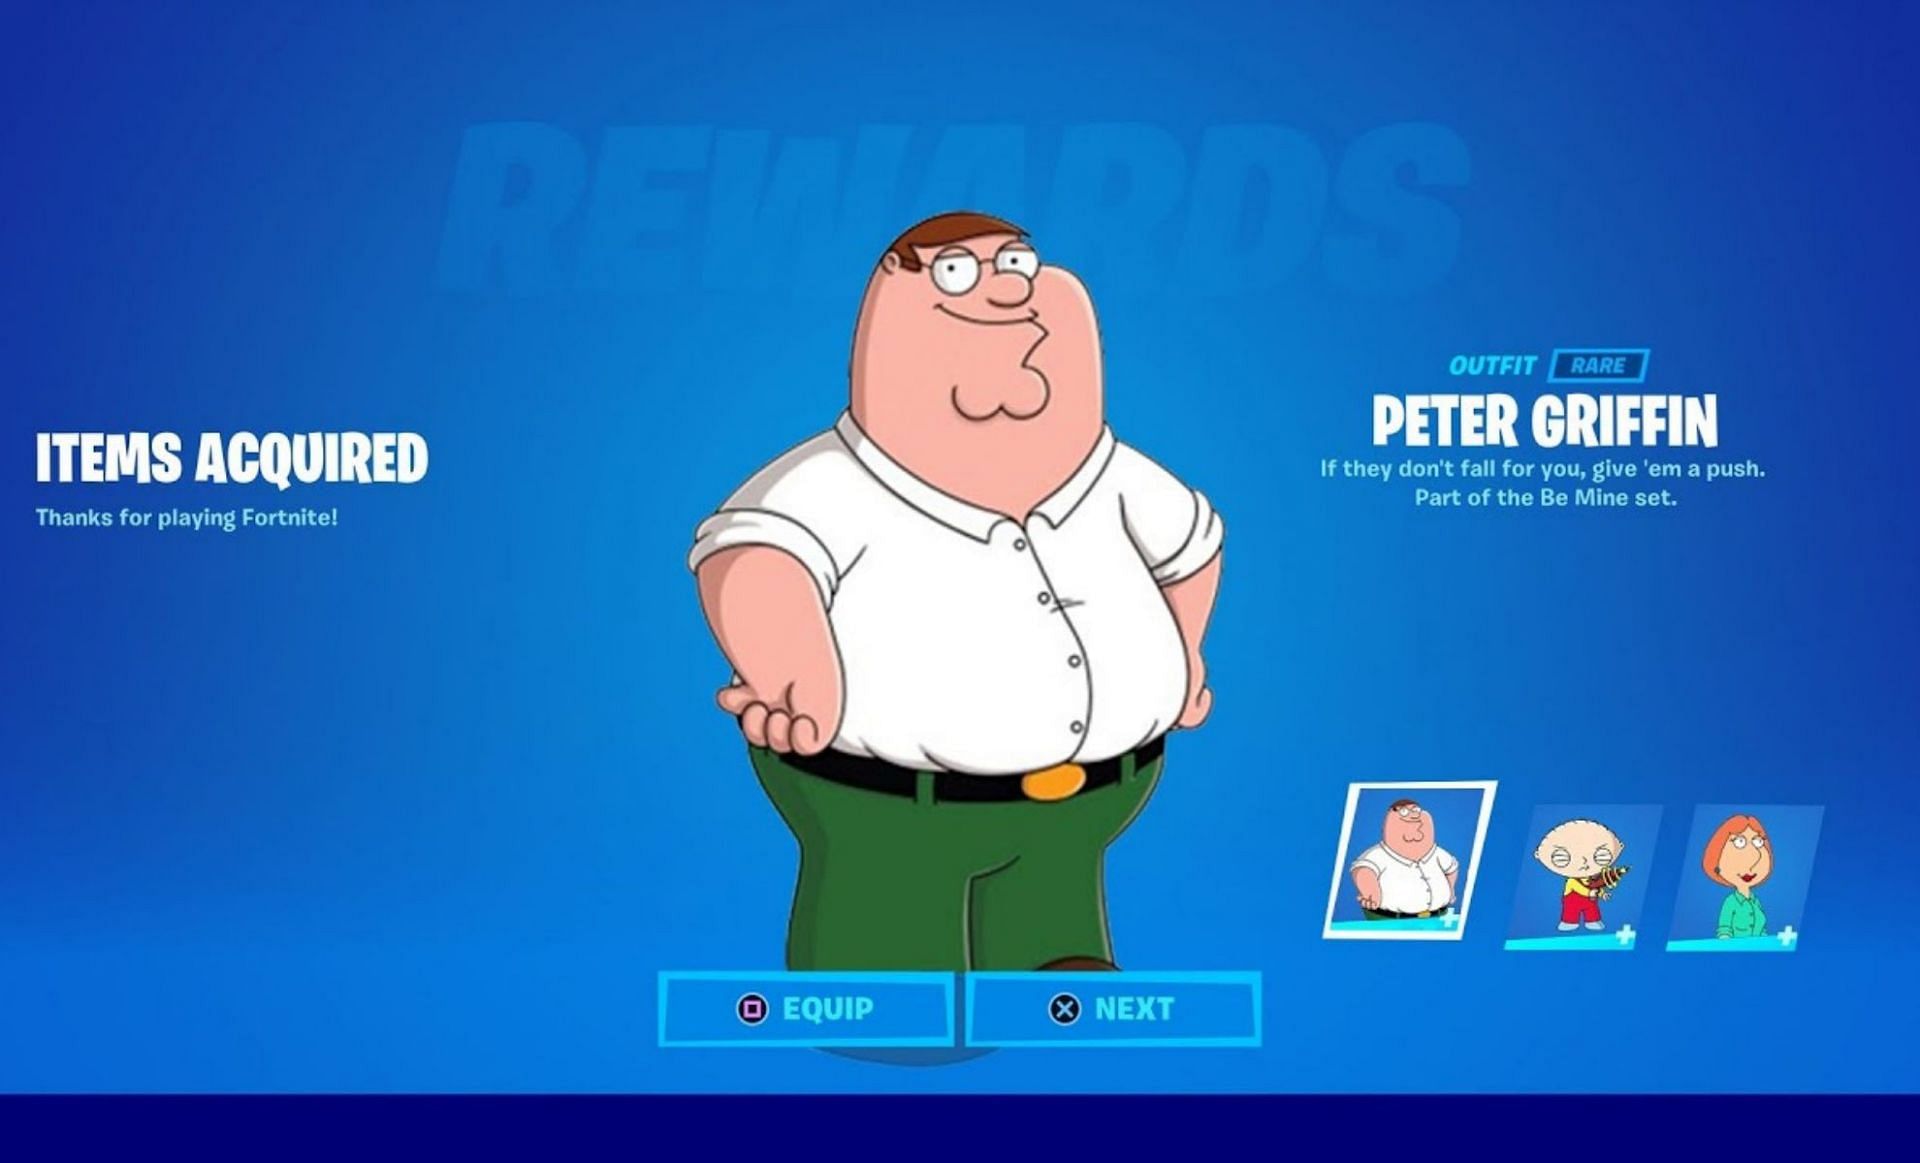 Peter Griffin's Blue Hair in the TV Show Family Guy - wide 6